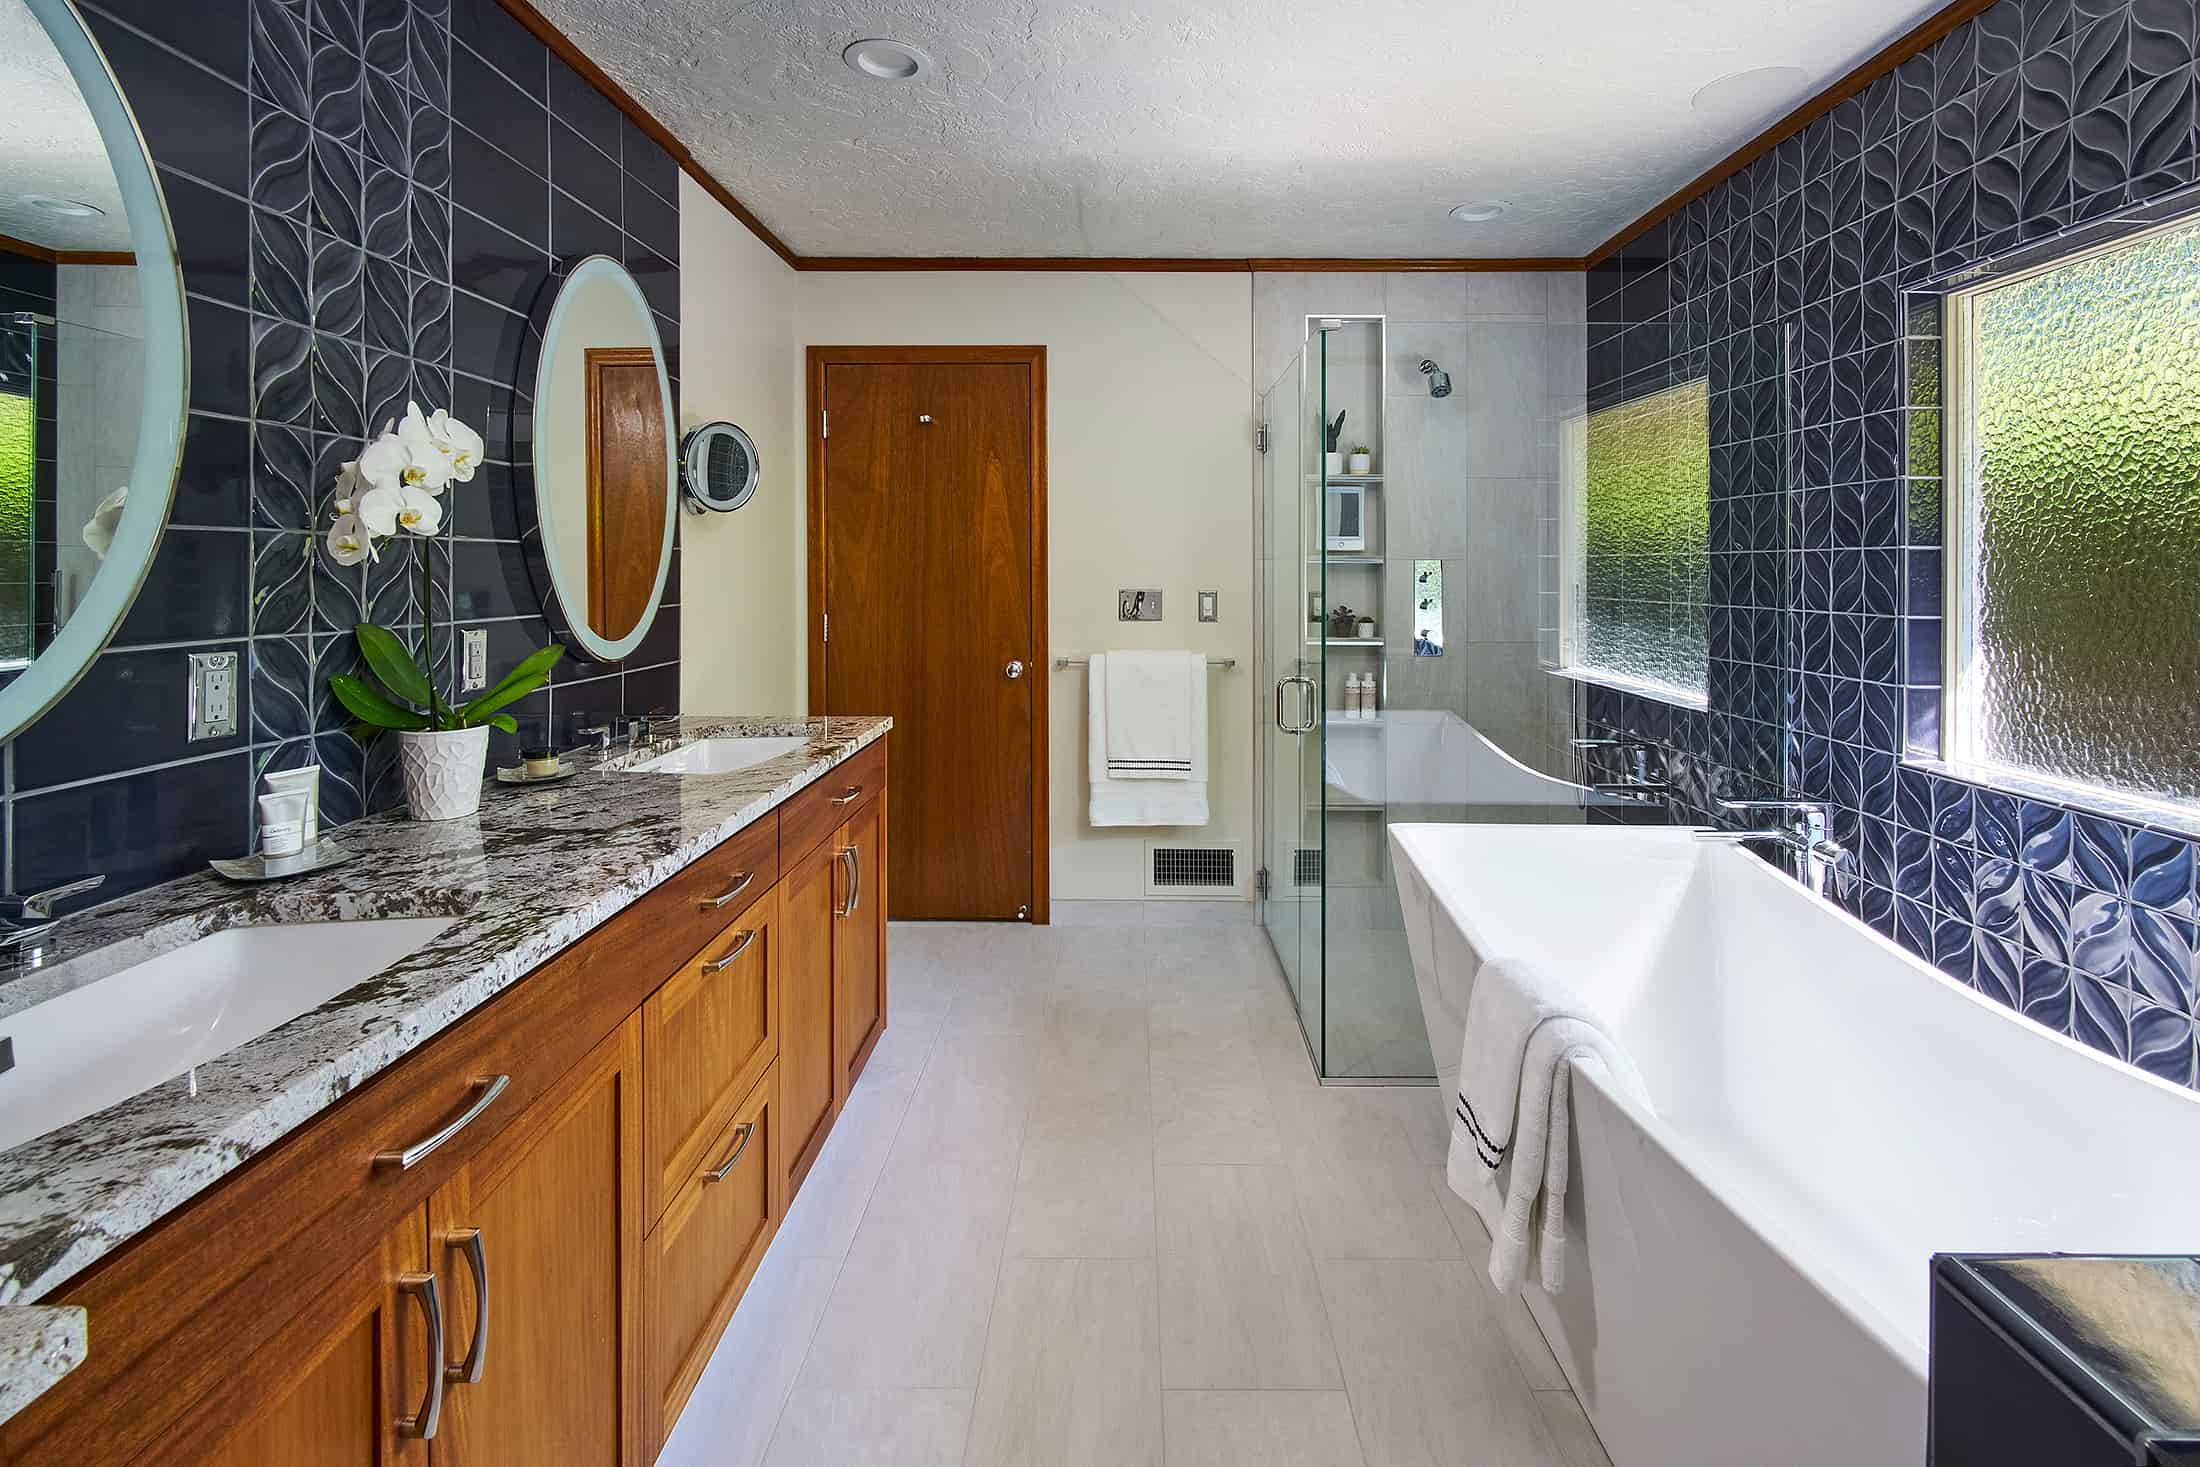 Spacious bathroom with freestanding tub and glass shower featuring blue custom tile work